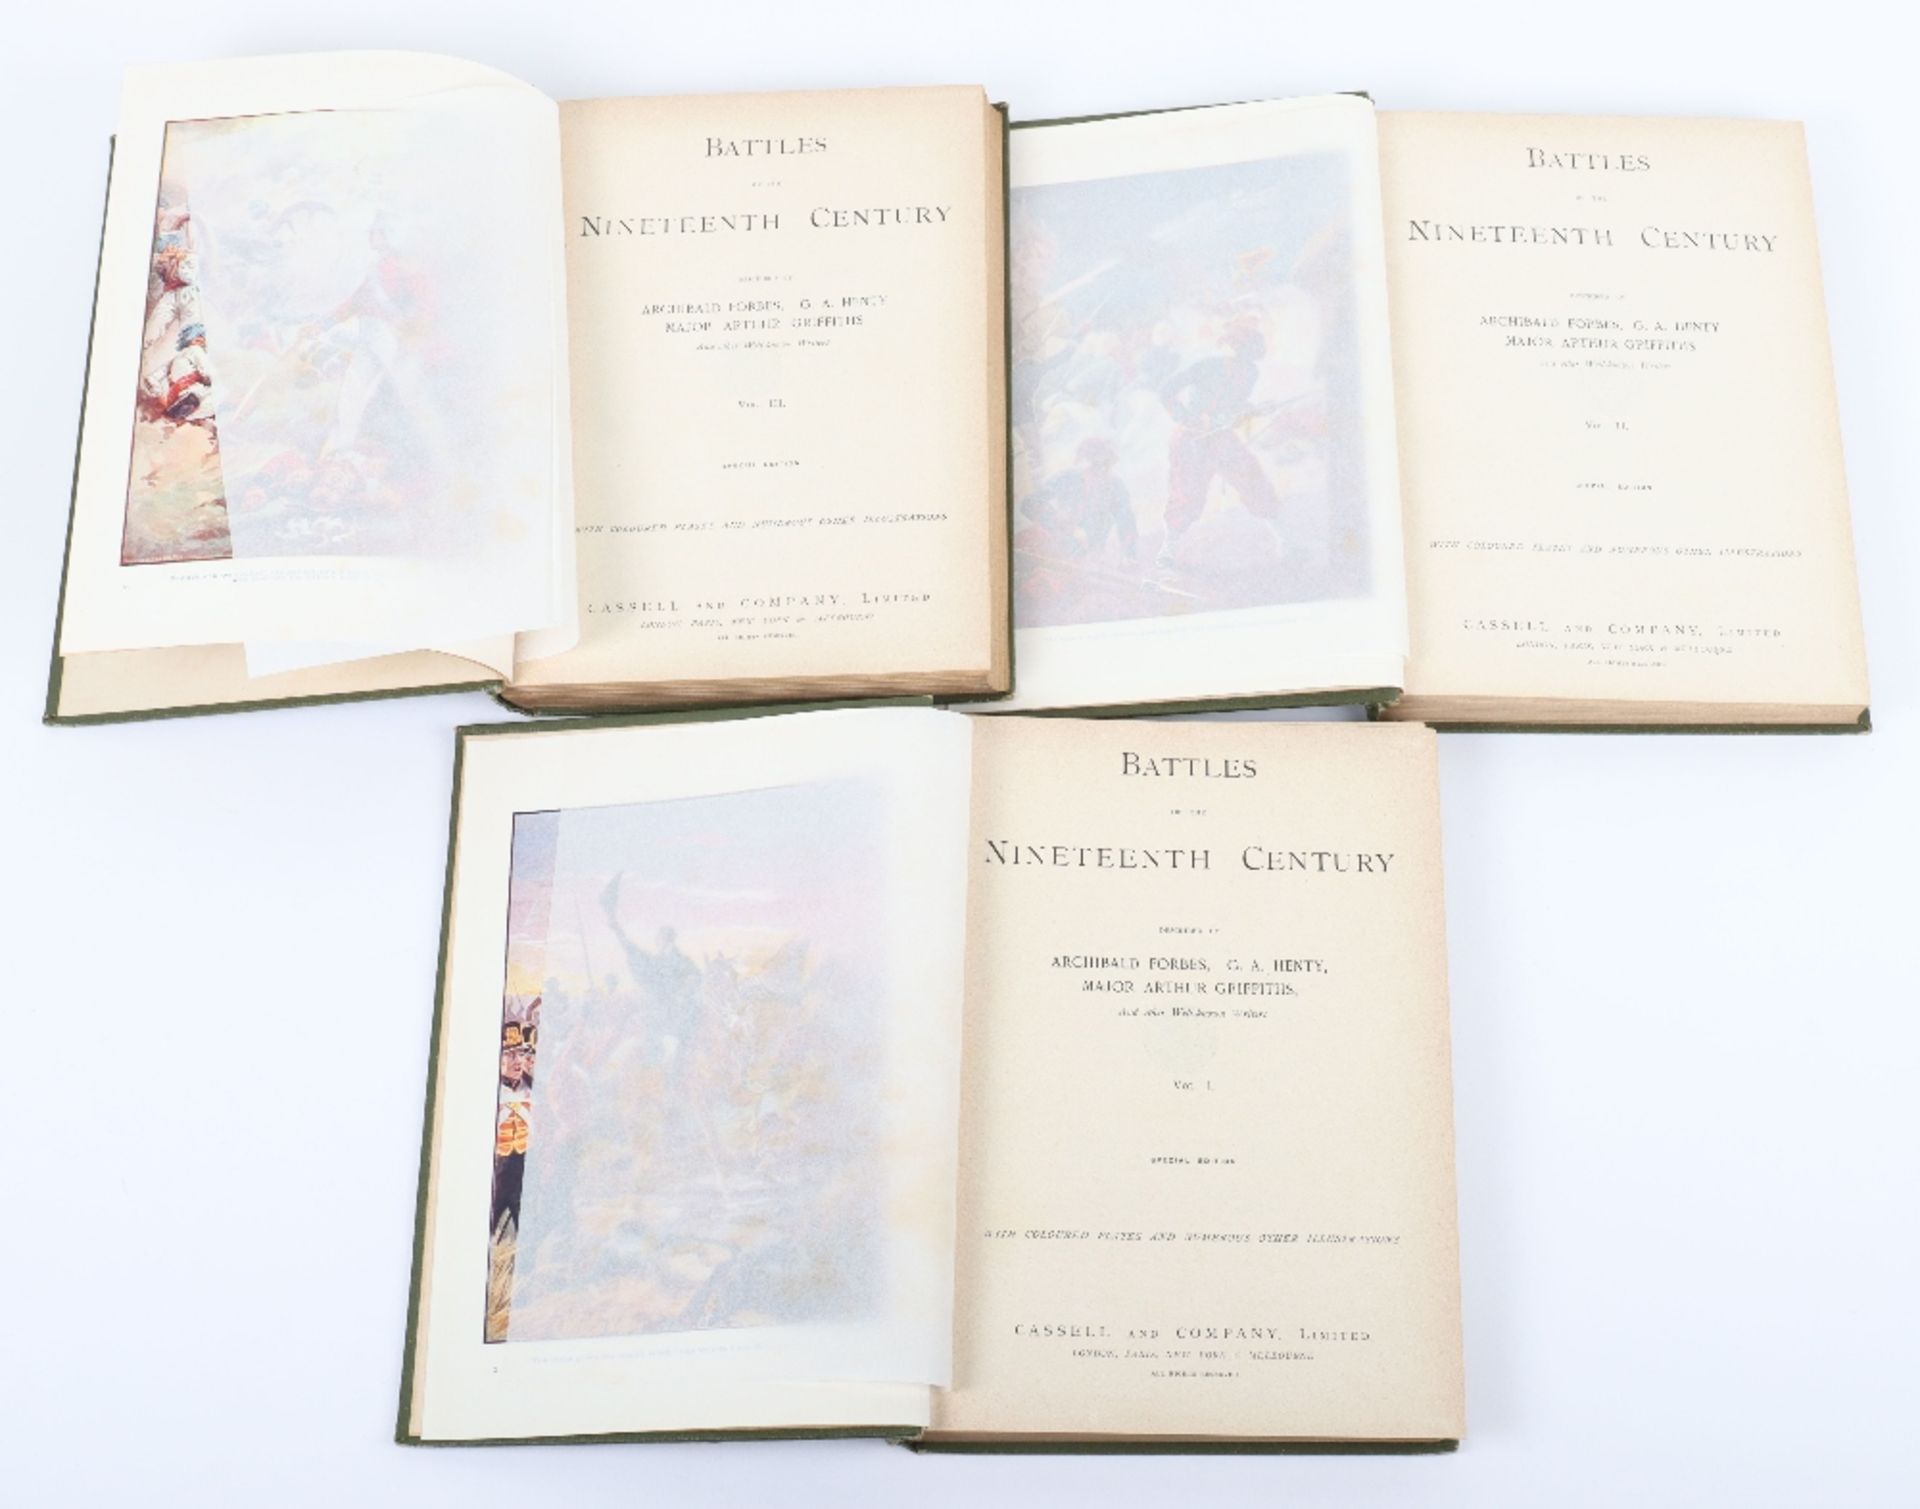 Archibald Forbes, Battles of the Nineteenth Century Volumes 1-VI - Image 3 of 4